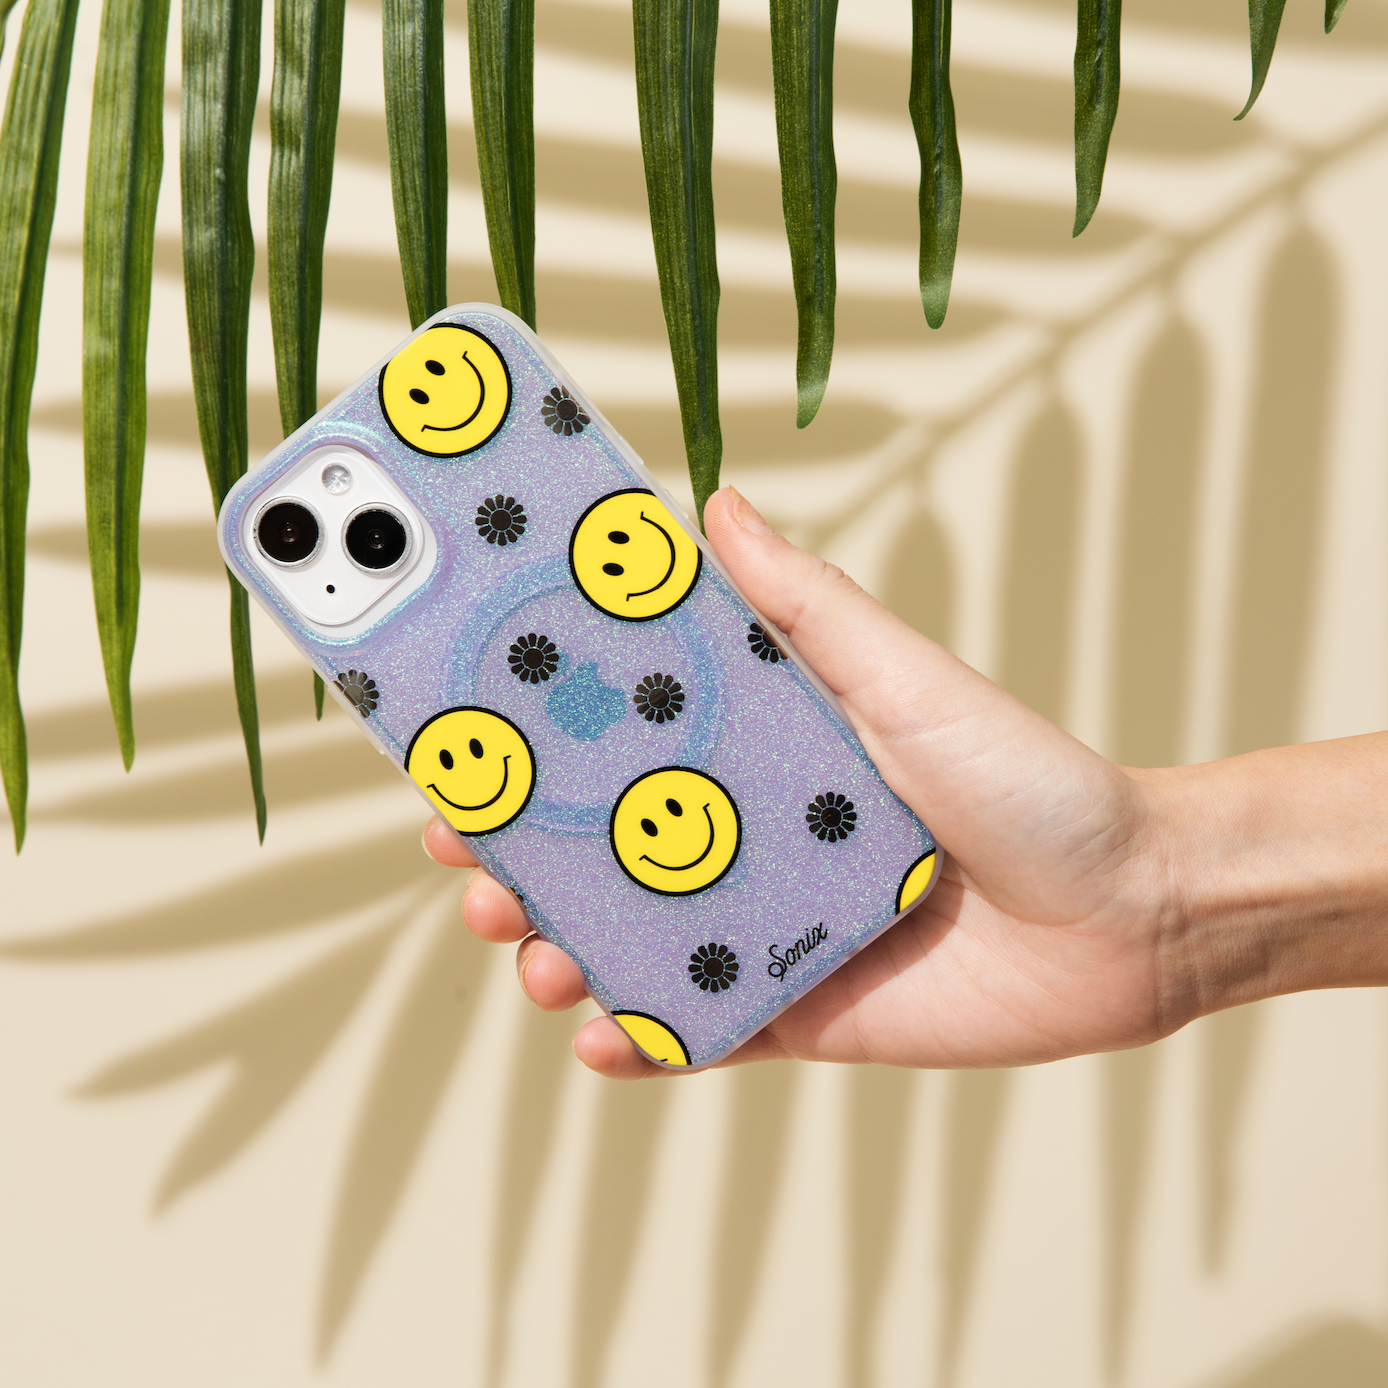 The clear purple case infused with iridescent glitter features happy faces and signature gold foil flowers shown on an iphone with a hand holding it infront of a palm tree